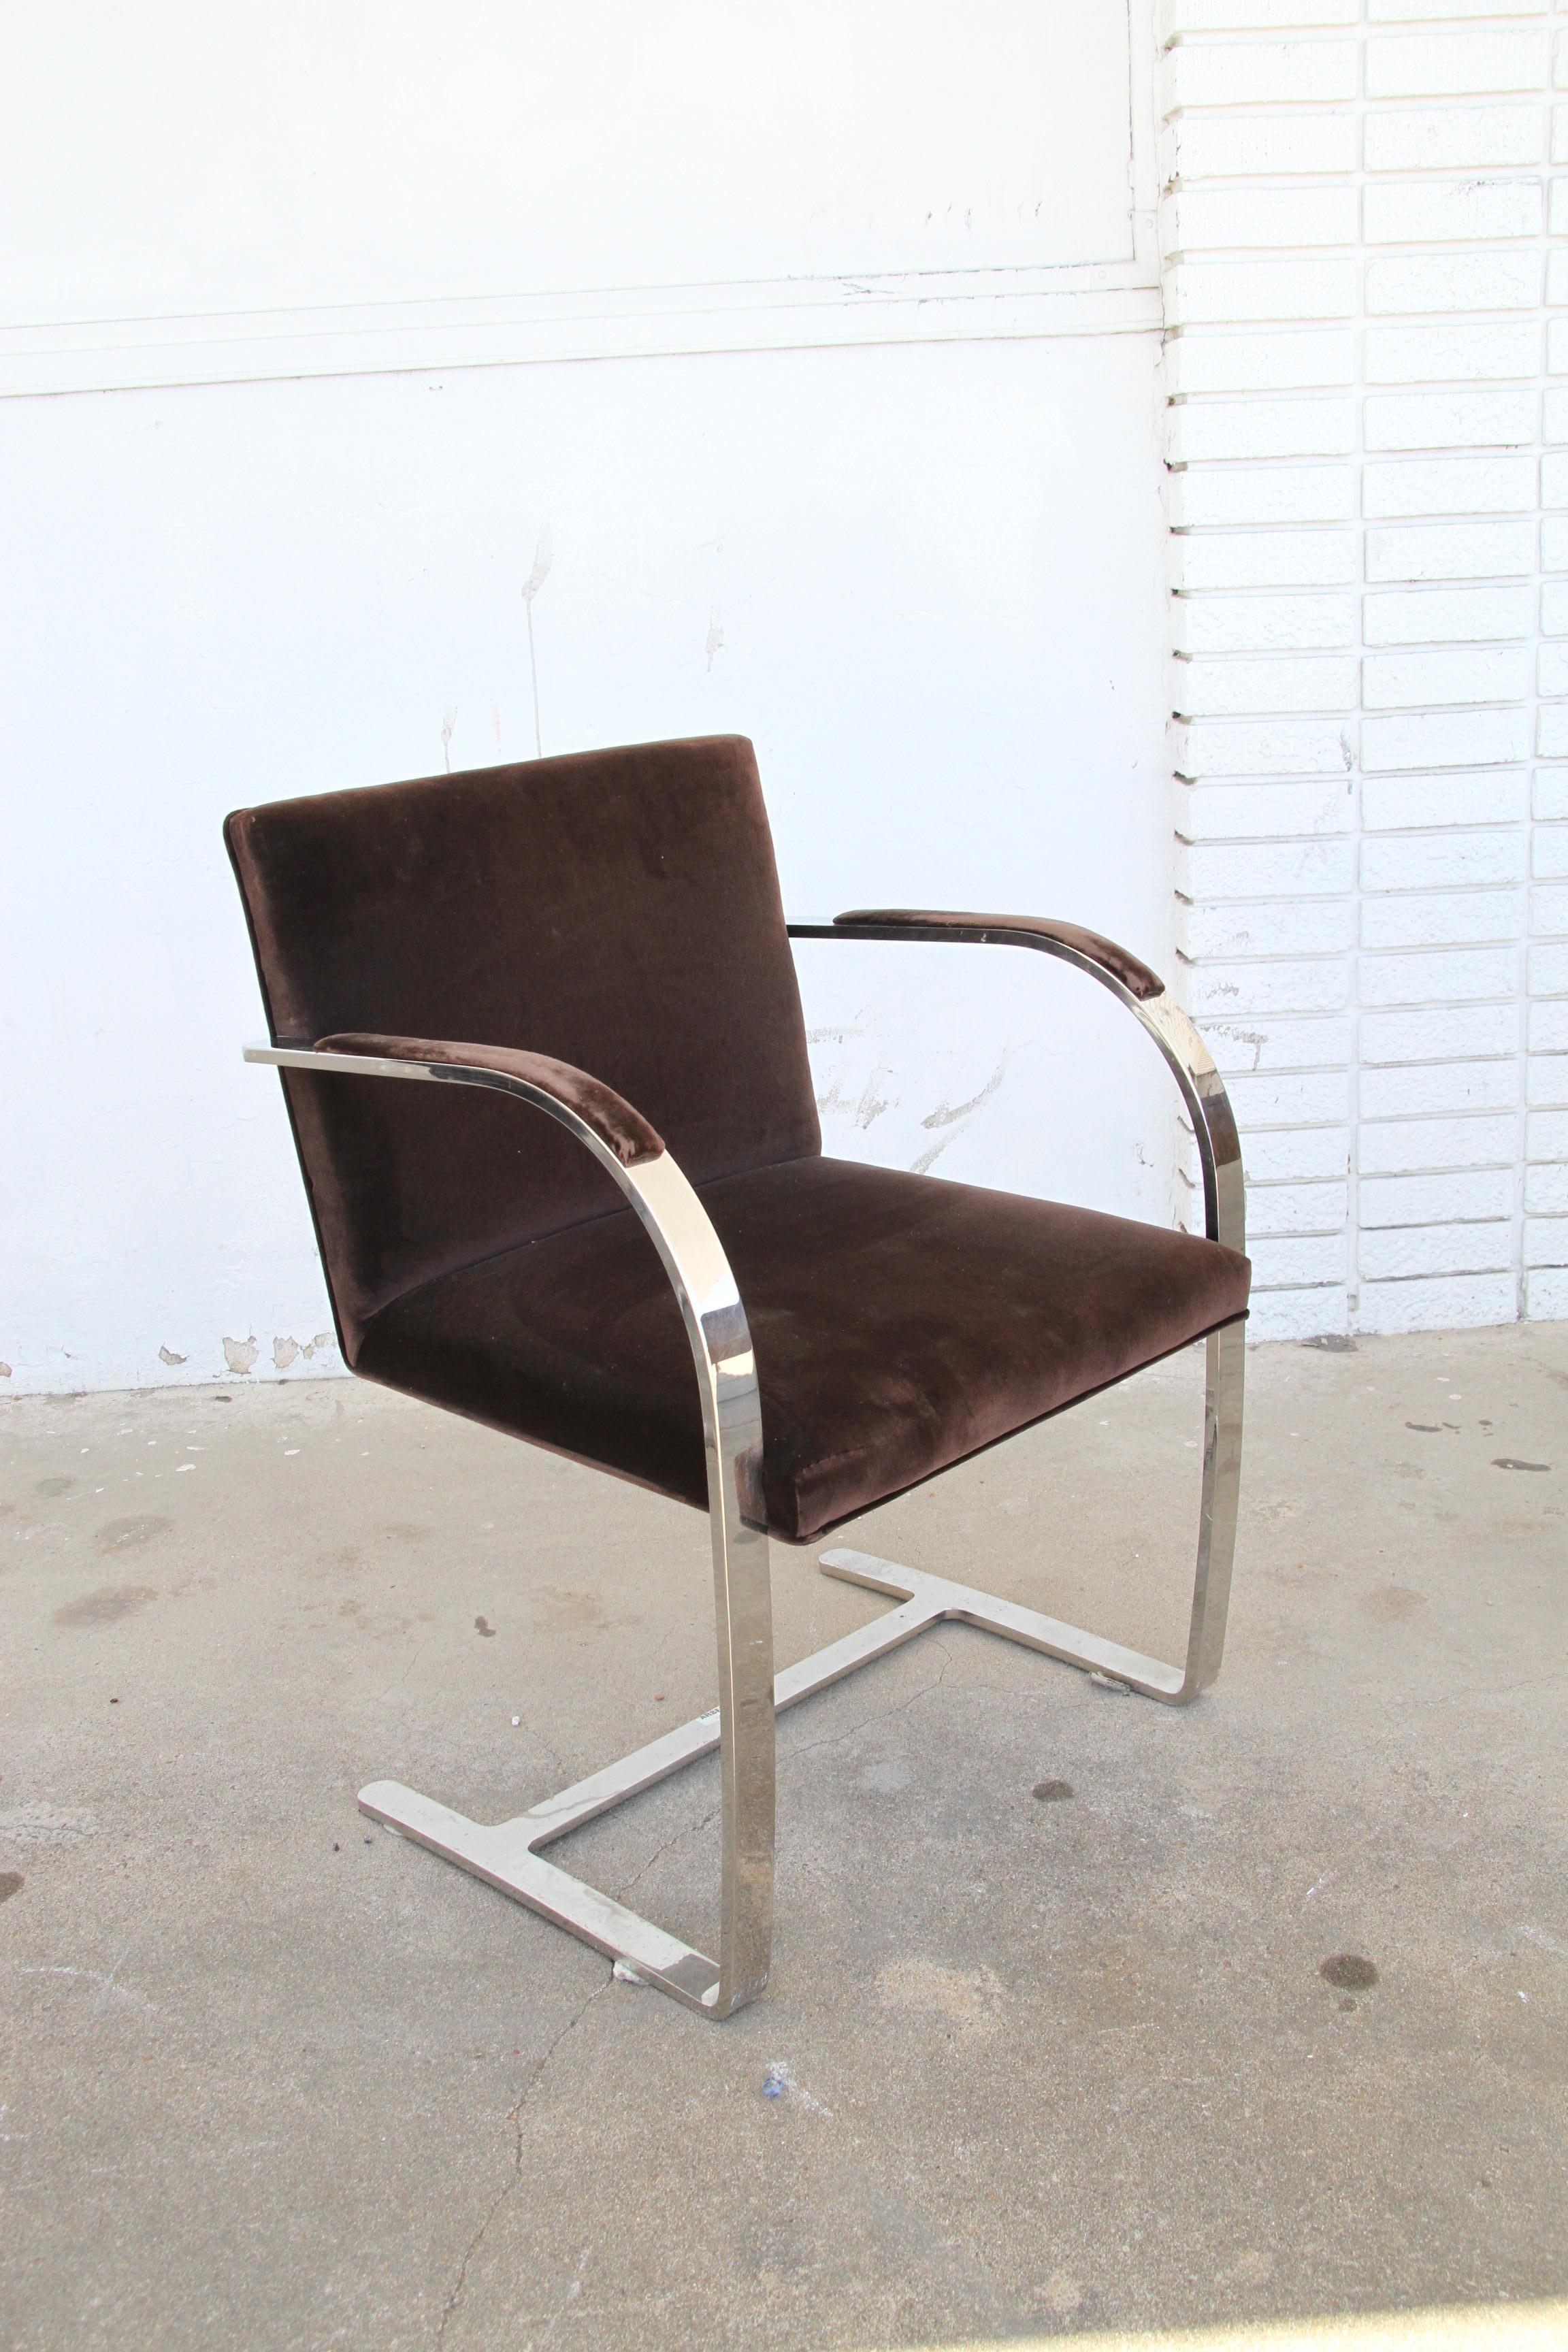 Pair Mies Van de Rhoe BRNO Arm Chairs

The Brno Flat Bar Chair (1930) offers the comfort of an armchair without the stuffiness or bulk. Stainless steel cantilevered frame.

Age appropriate wear see photos.
Seat Height: 18 in.